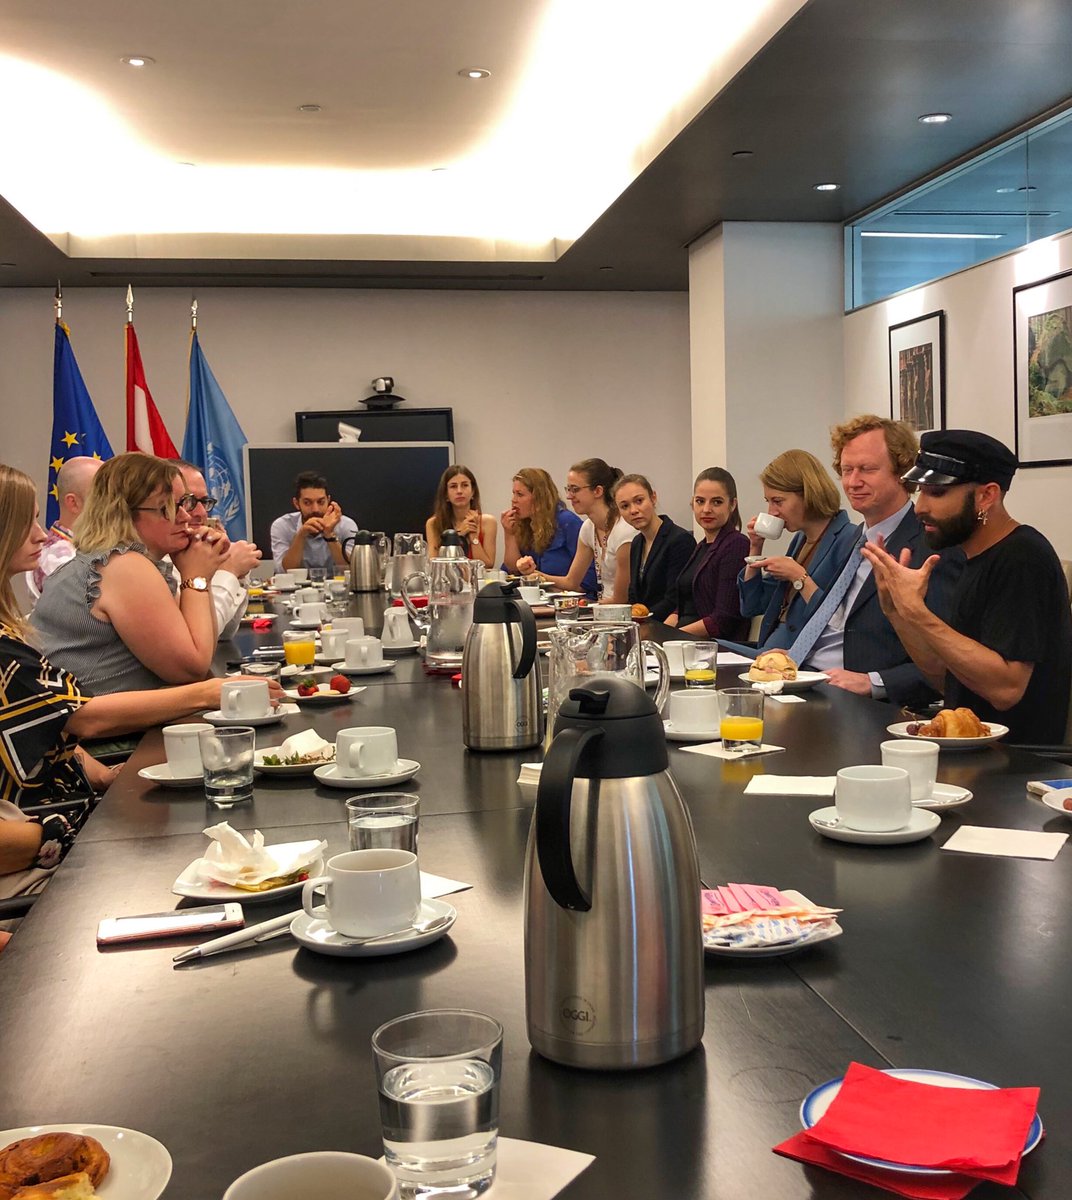 I never asked for permission to be who I am @ConchitaWurst, tells the #UN #LGBTI core group at the informal breakfast meeting at the #Austrian Mission today. #WorldPrideNYC